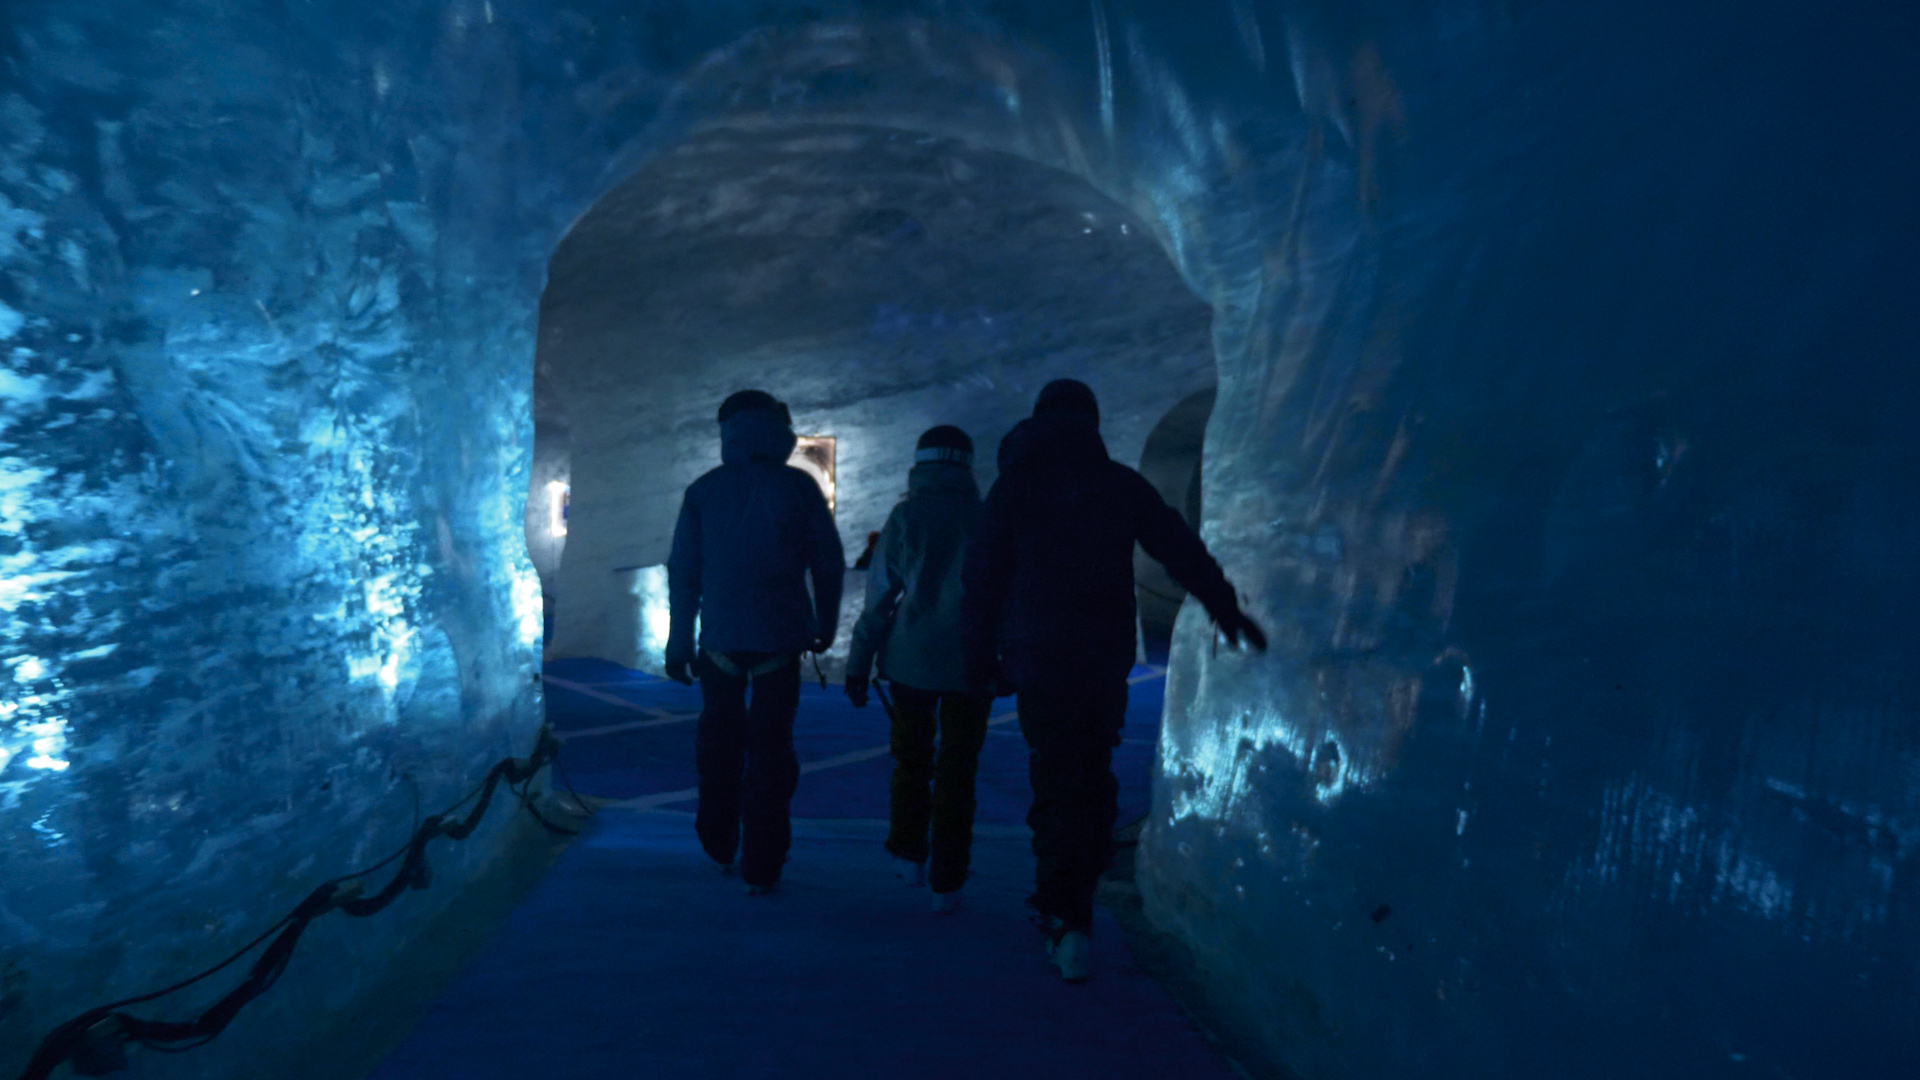 Three skiers walk through a cave of blue ice on their way back from the Vallee Blanche